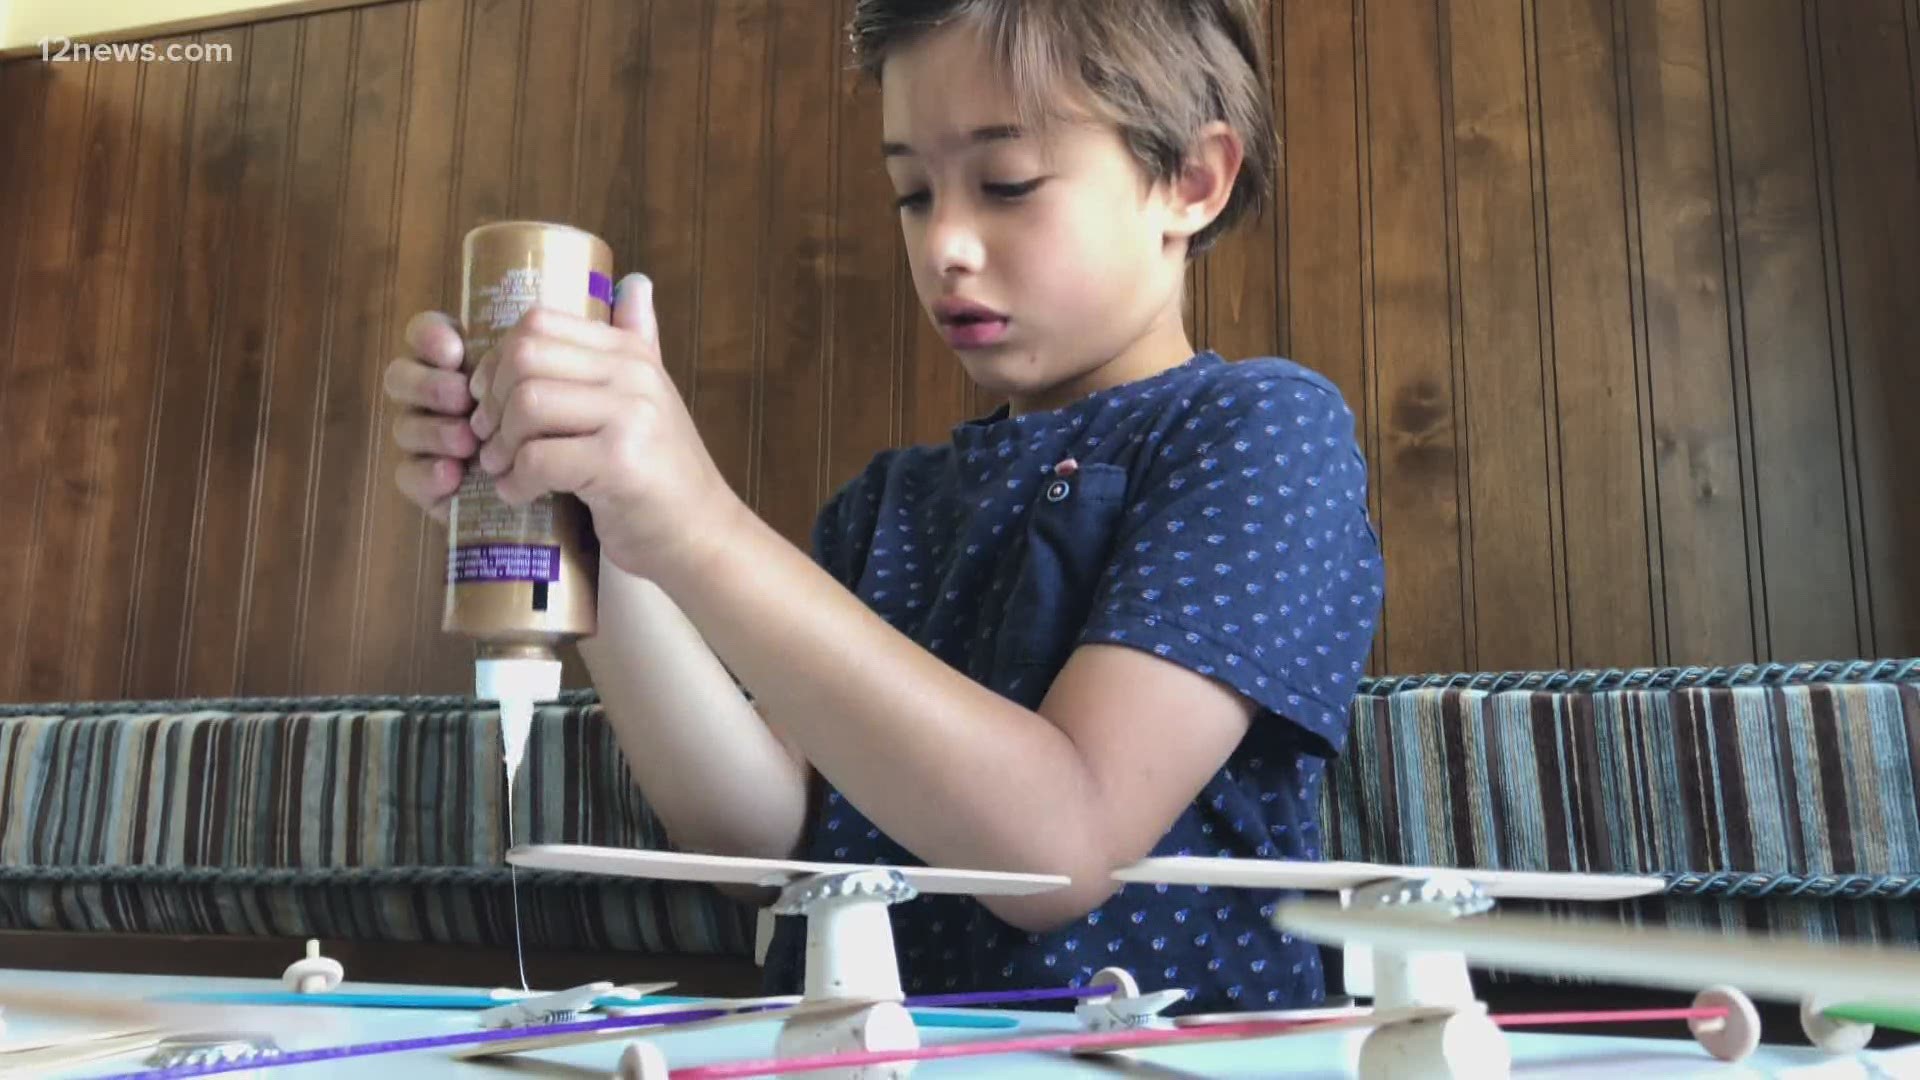 6-year-old Nicholas Bubeck is giving back to a non-profit through his unique DIY airplane business. The procedes go to The Triple Heart Foundation.